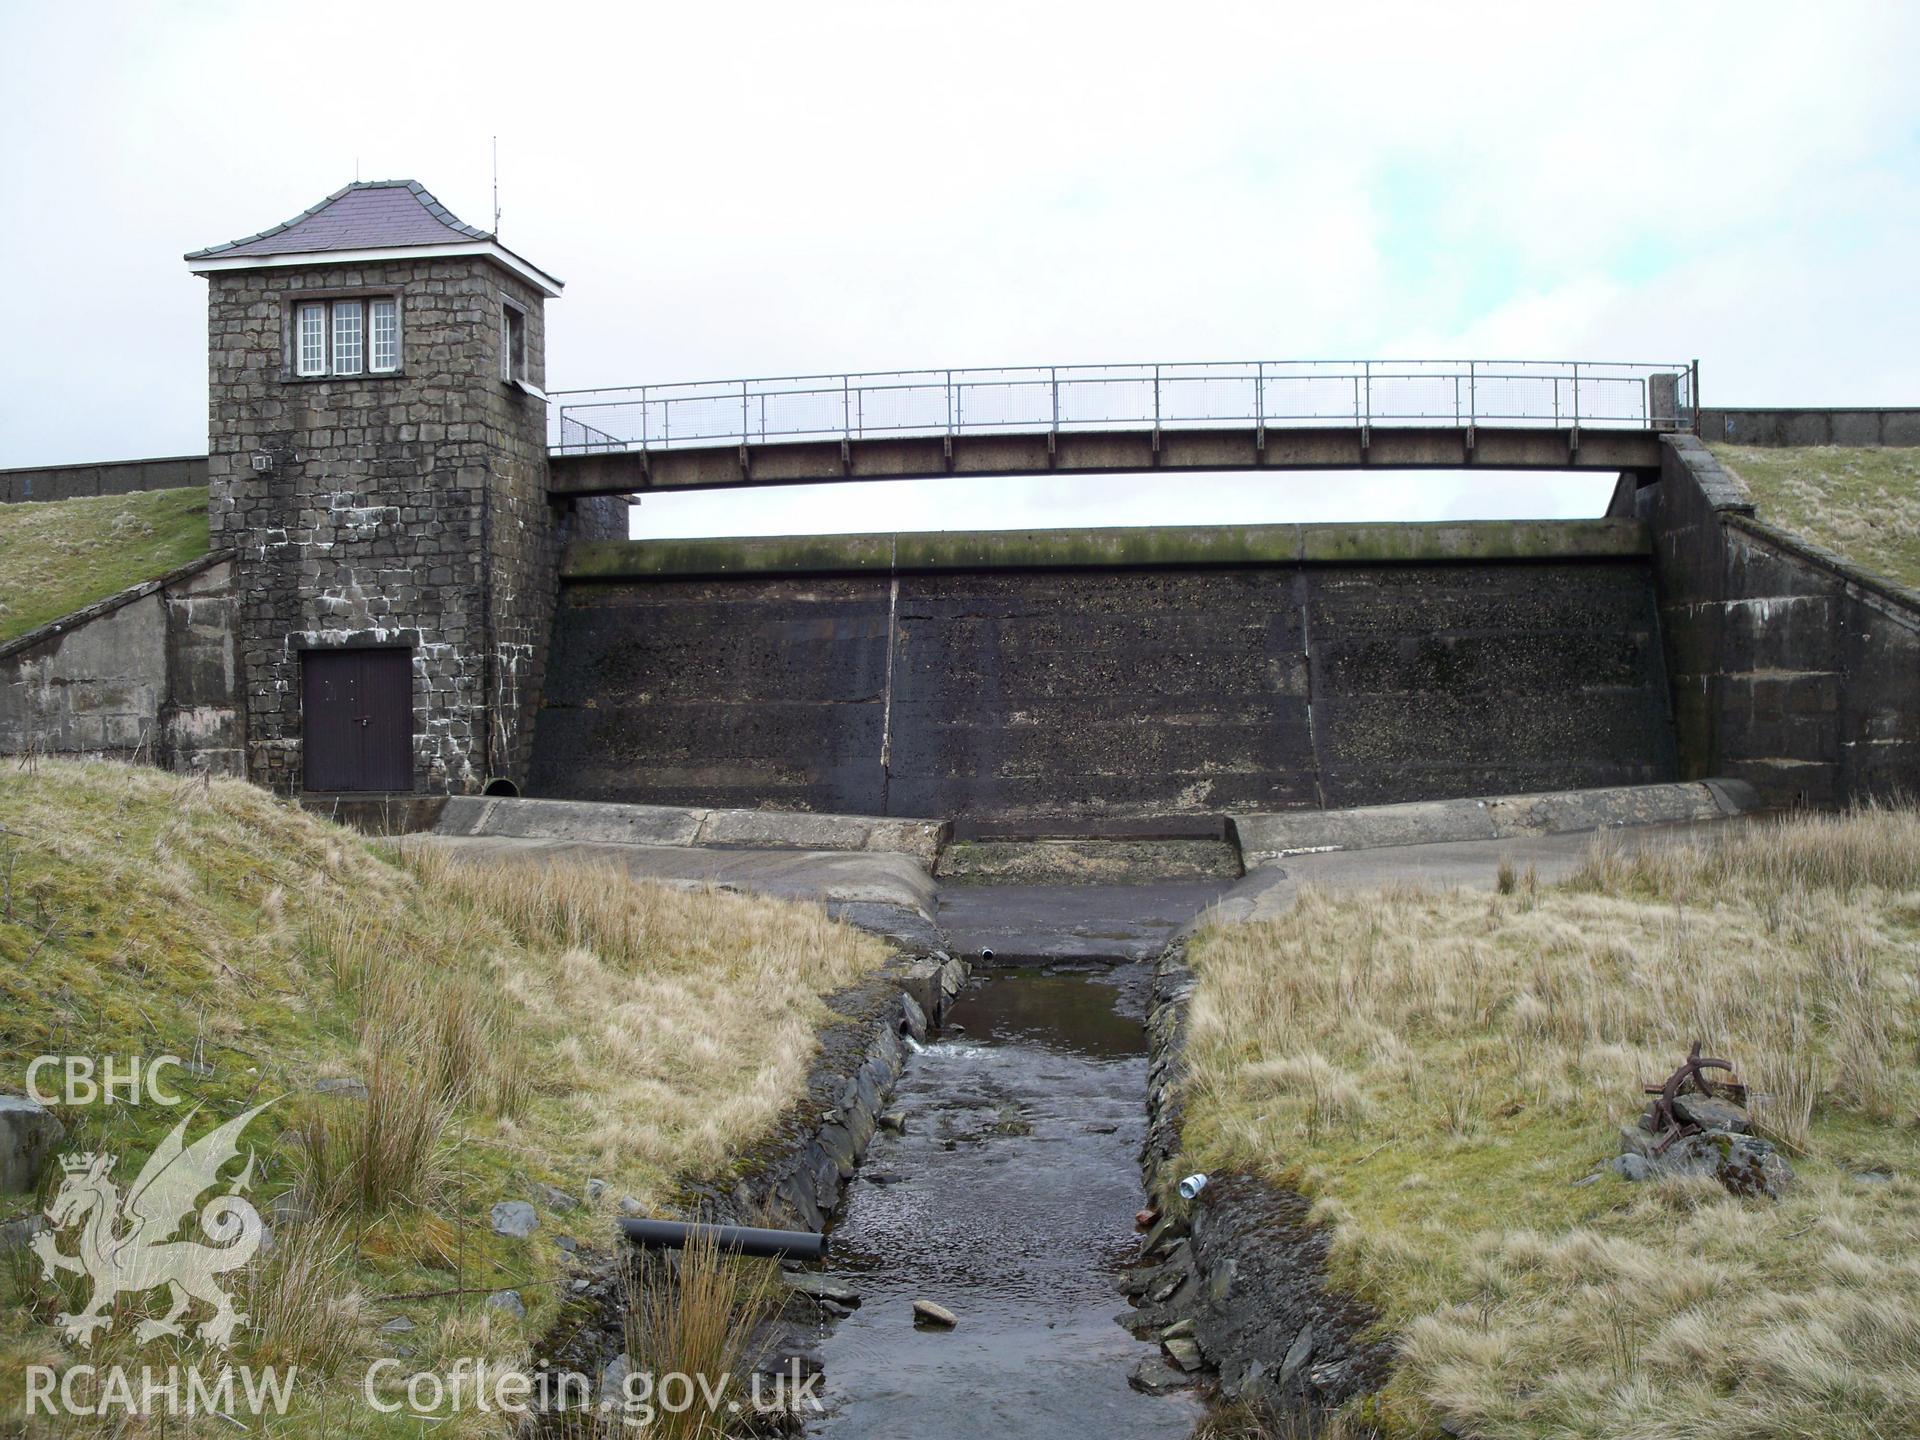 Detail of dam, outlet channel and regulation tower/valve house; taken from the south.